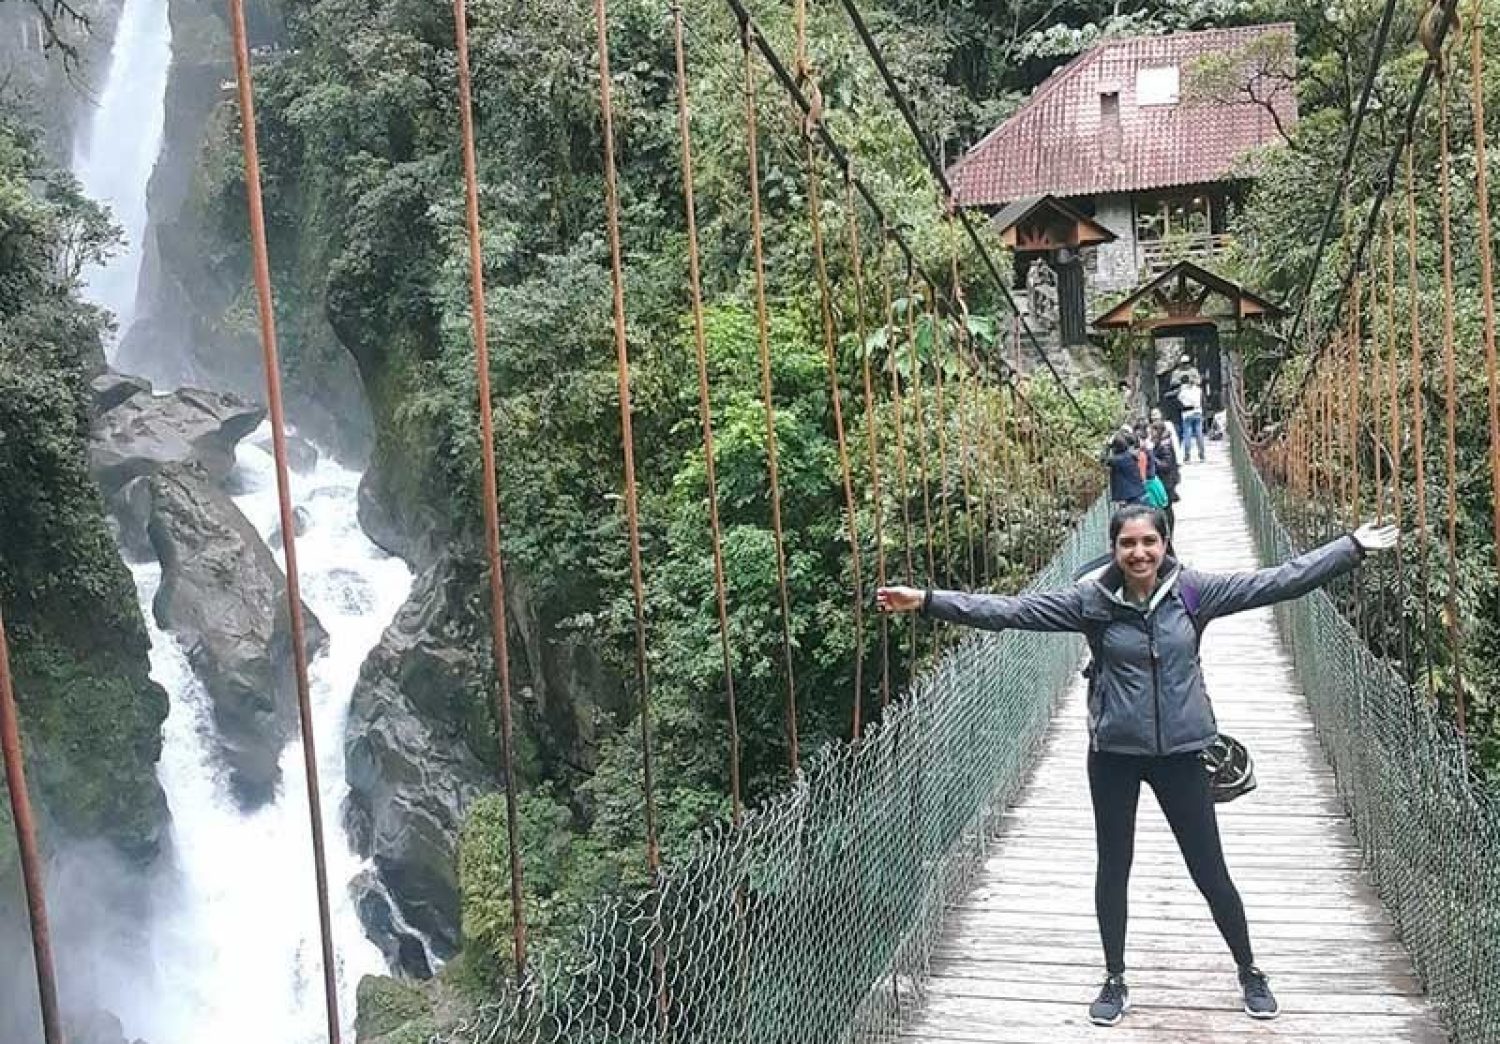 A student standing on a bridge in a foreign country